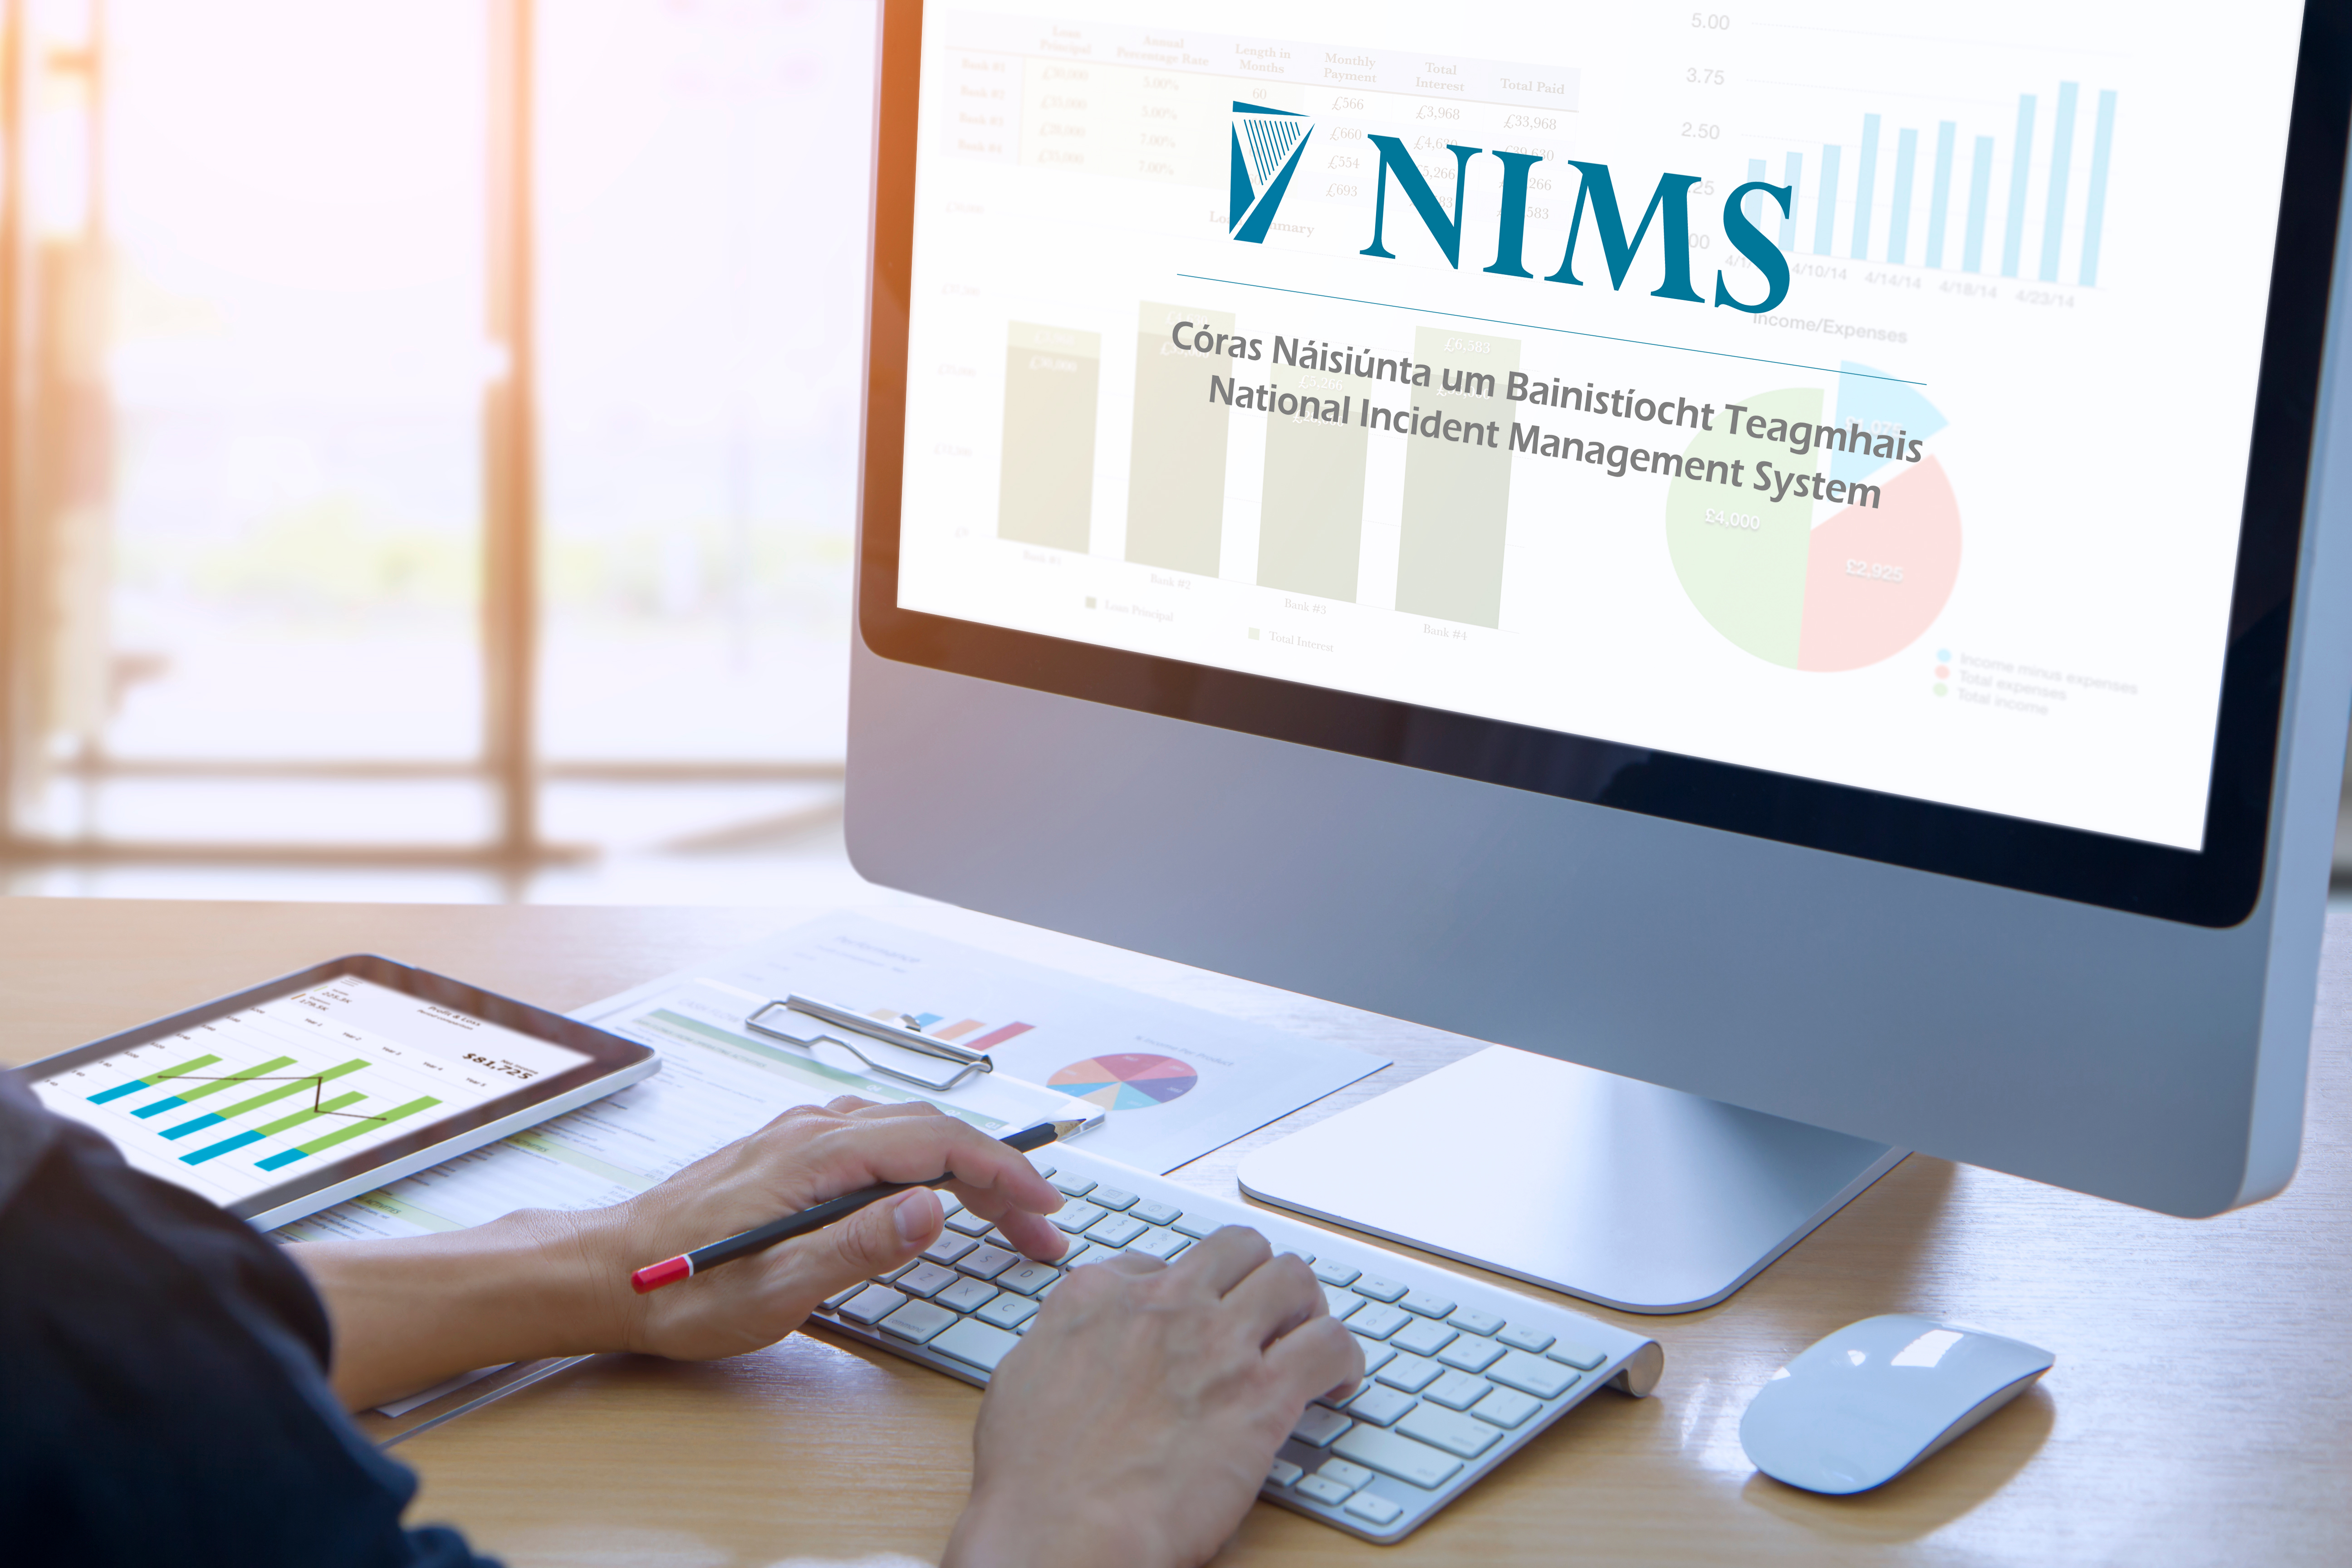 NIMS, the National Incident Management System